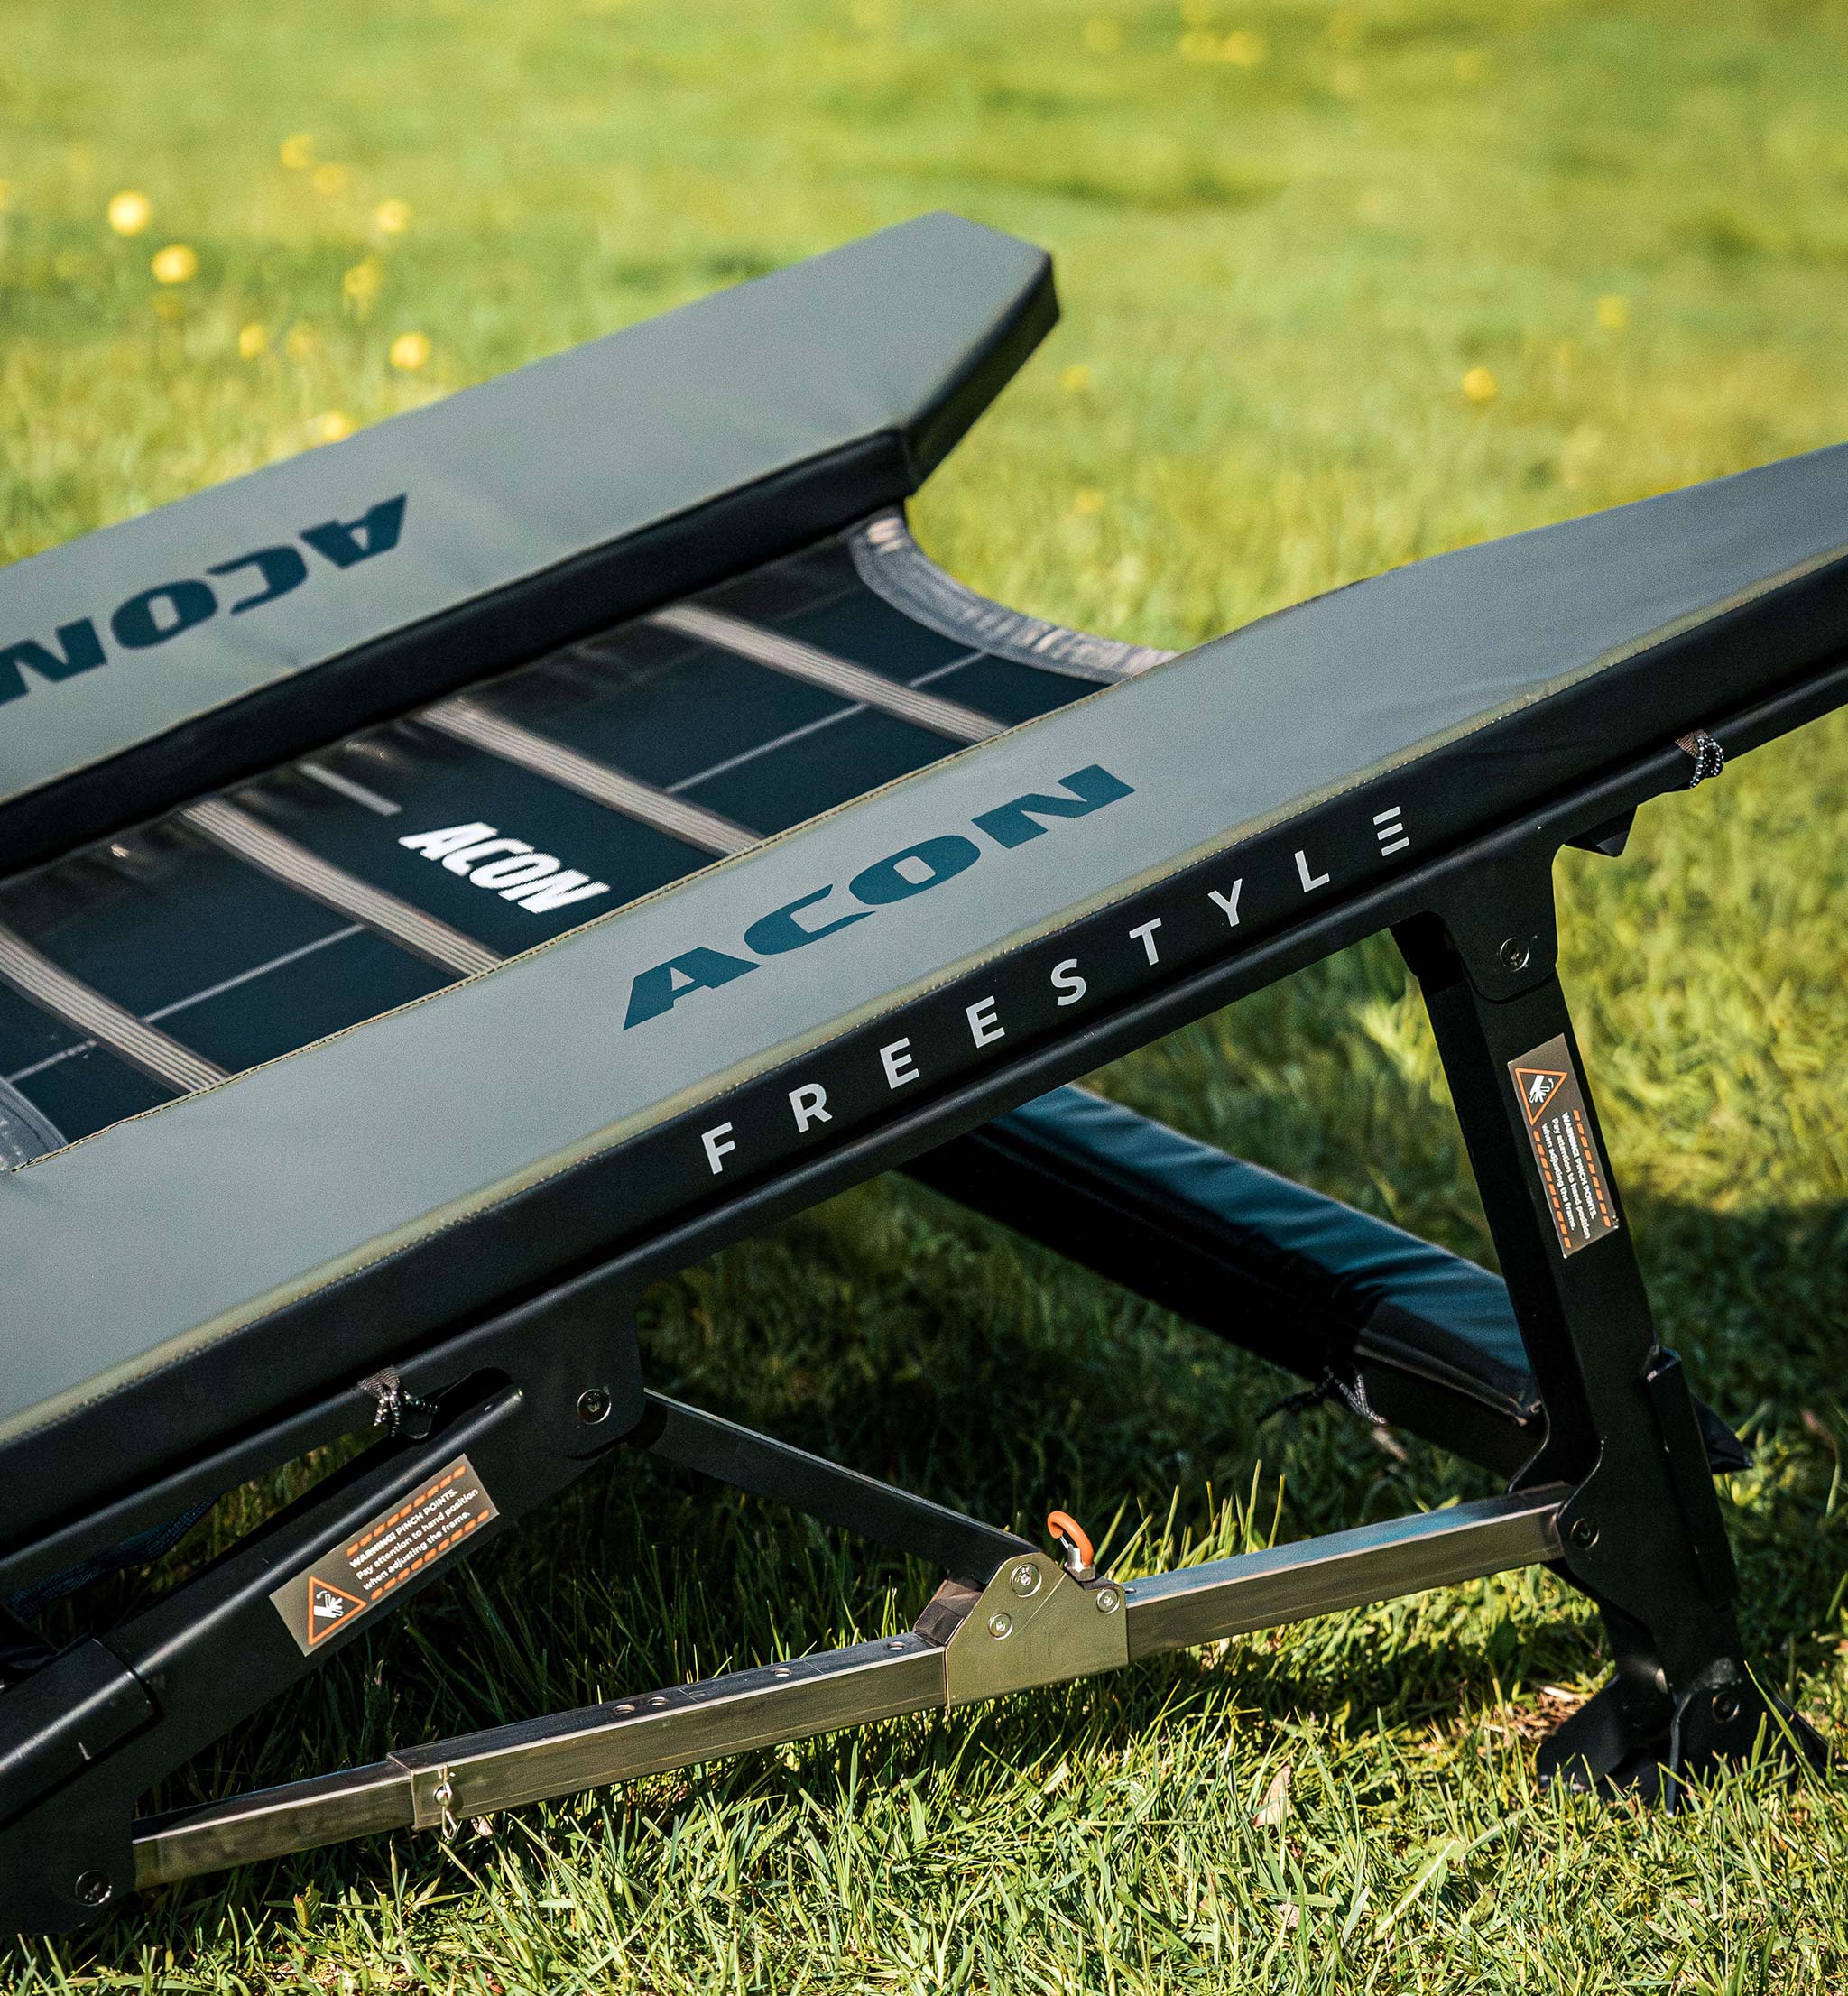 Close-up of the Acon Freestyle Mini Trampoline on the lawn.